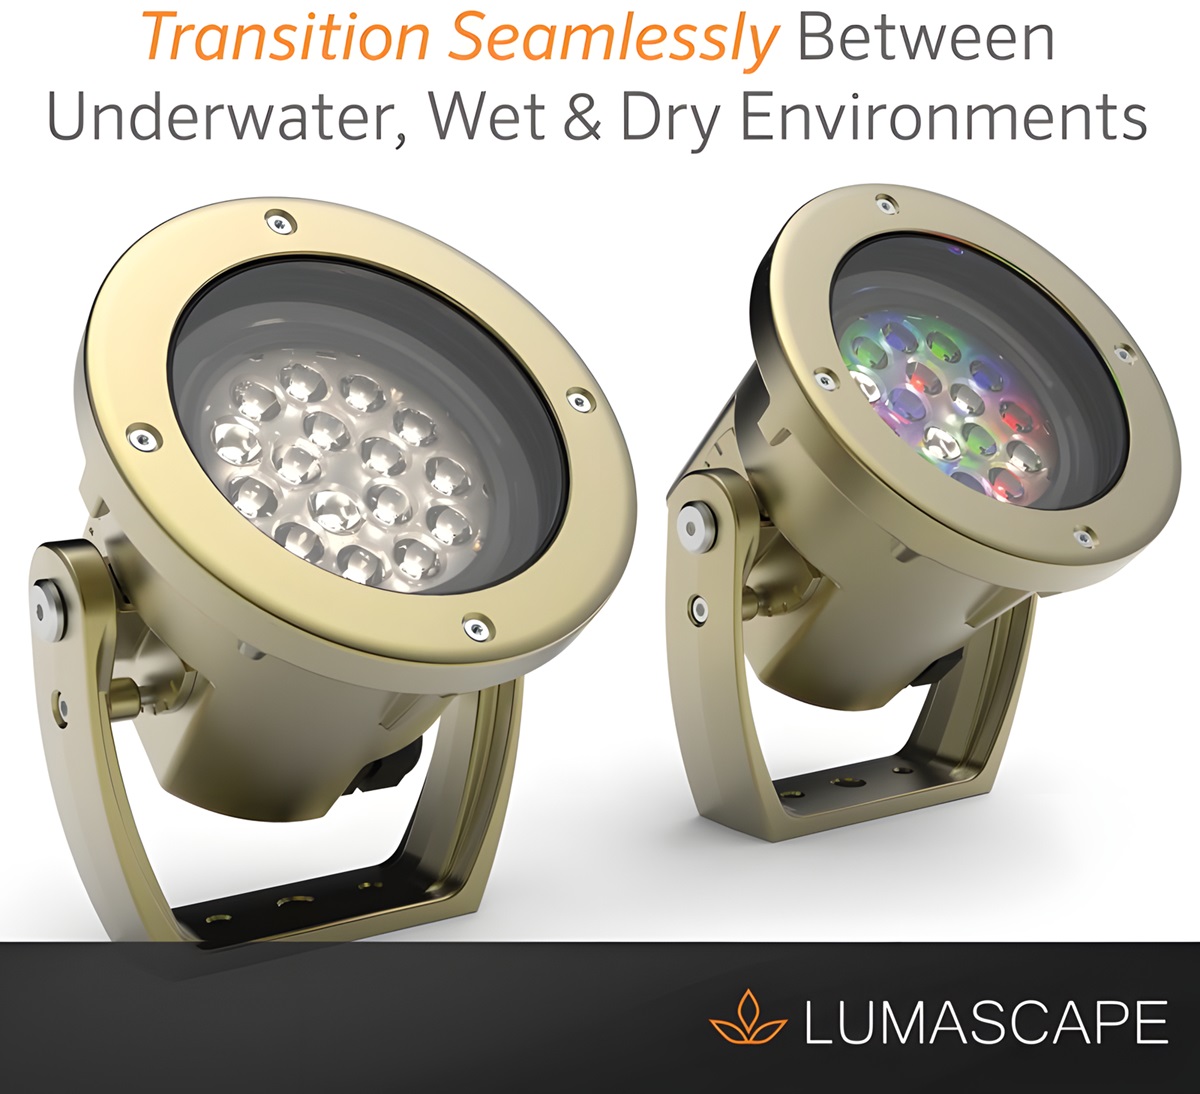 Lumascape Introduces High-performance LED Projectors for Underwater, Wet/dry, and Dry Applications